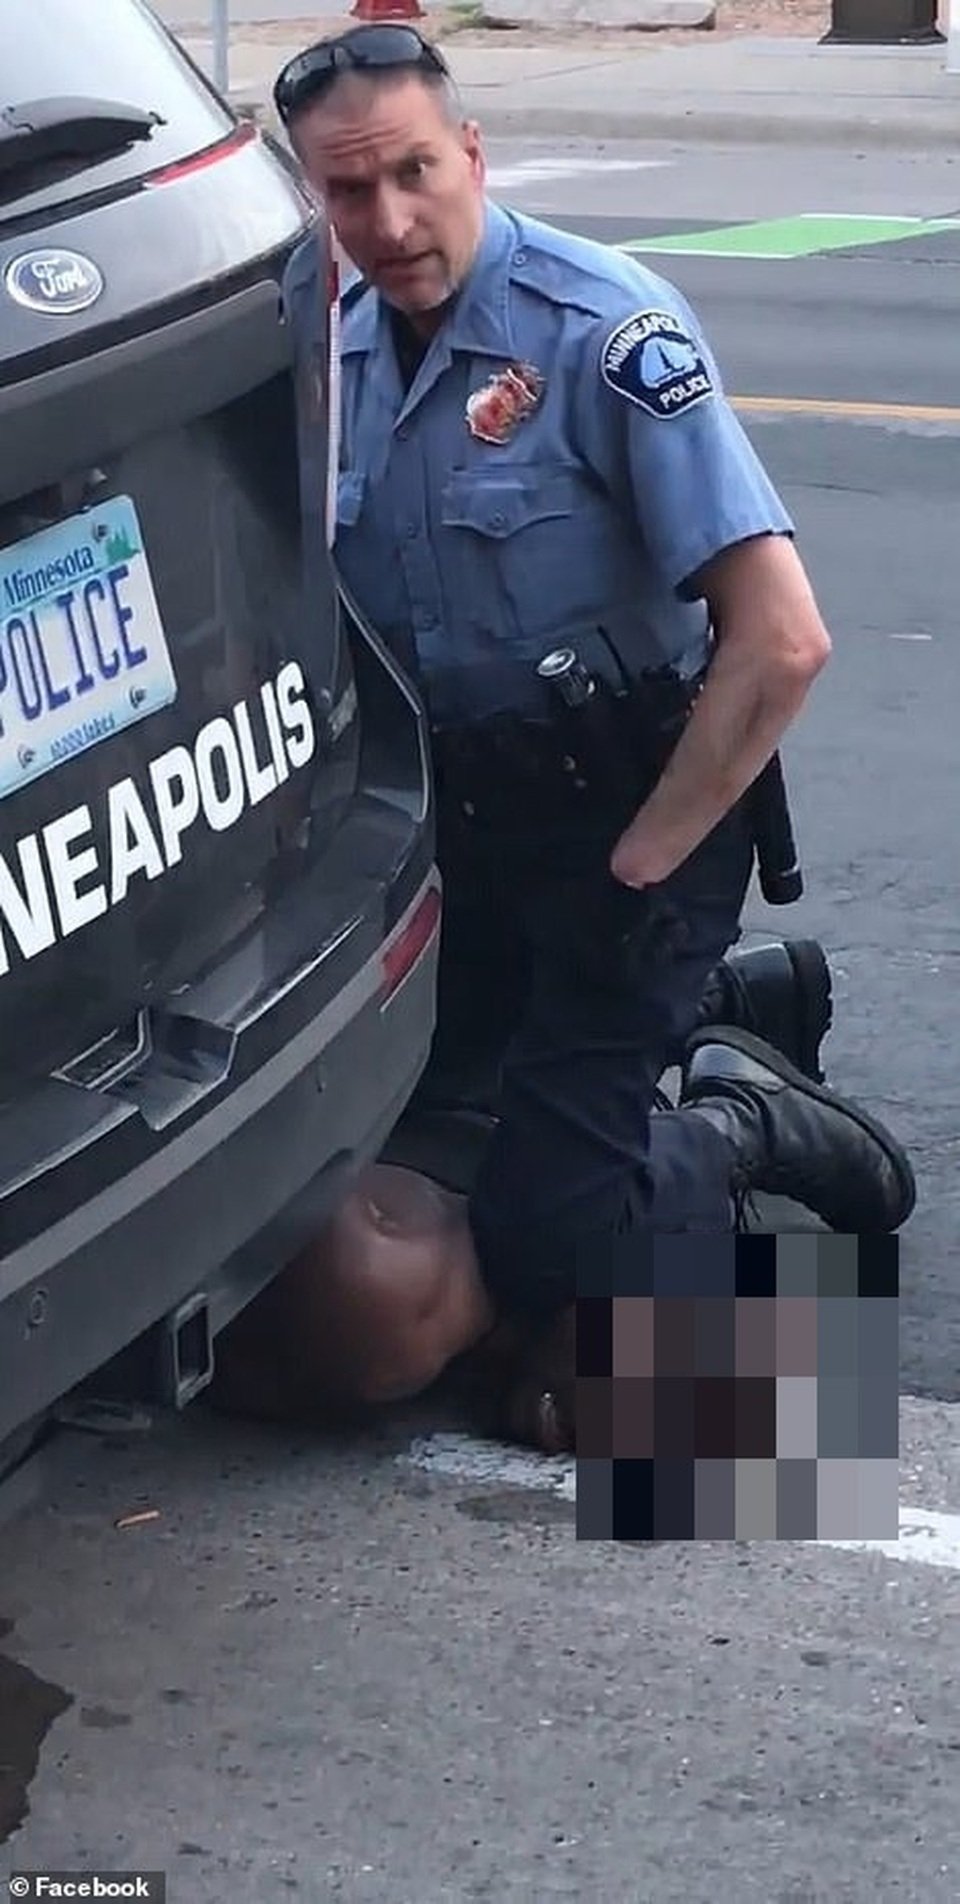 America: Shocking case of a black man dying after a police officer pressed his knee on his neck